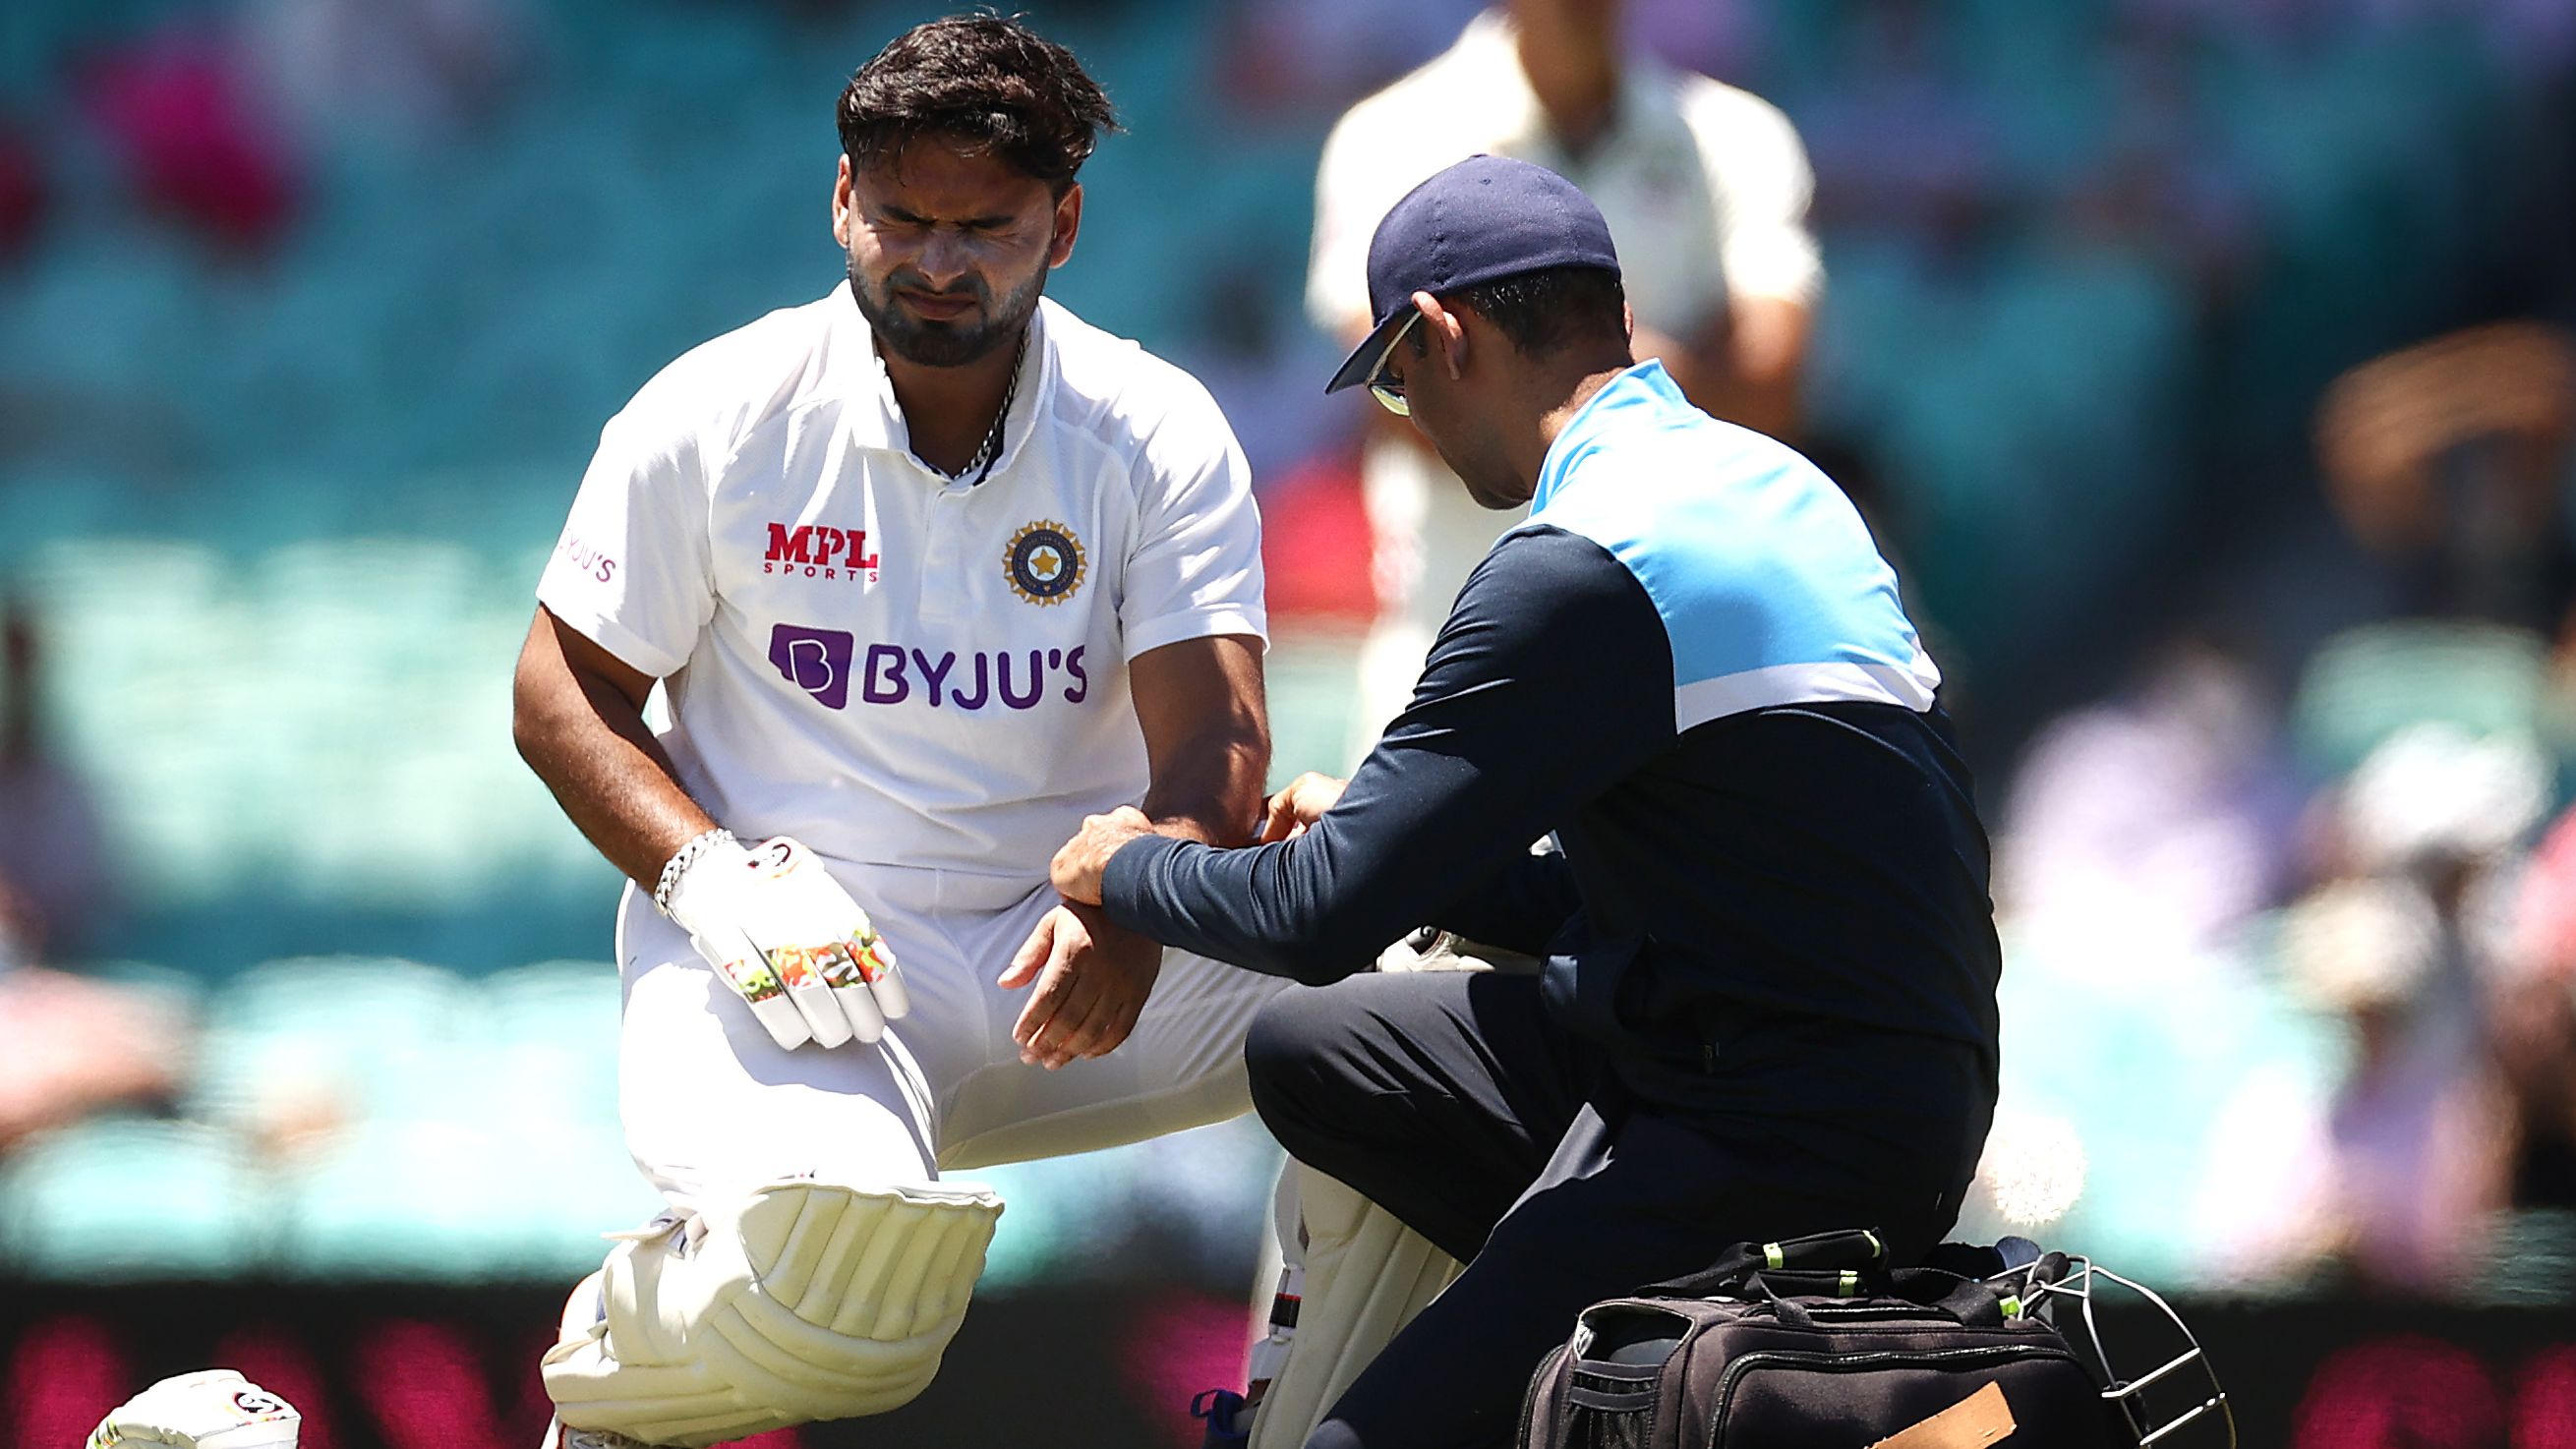 Rishabh Pant of India reacts after being struck by a delivery from Pat Cummins of Australia.